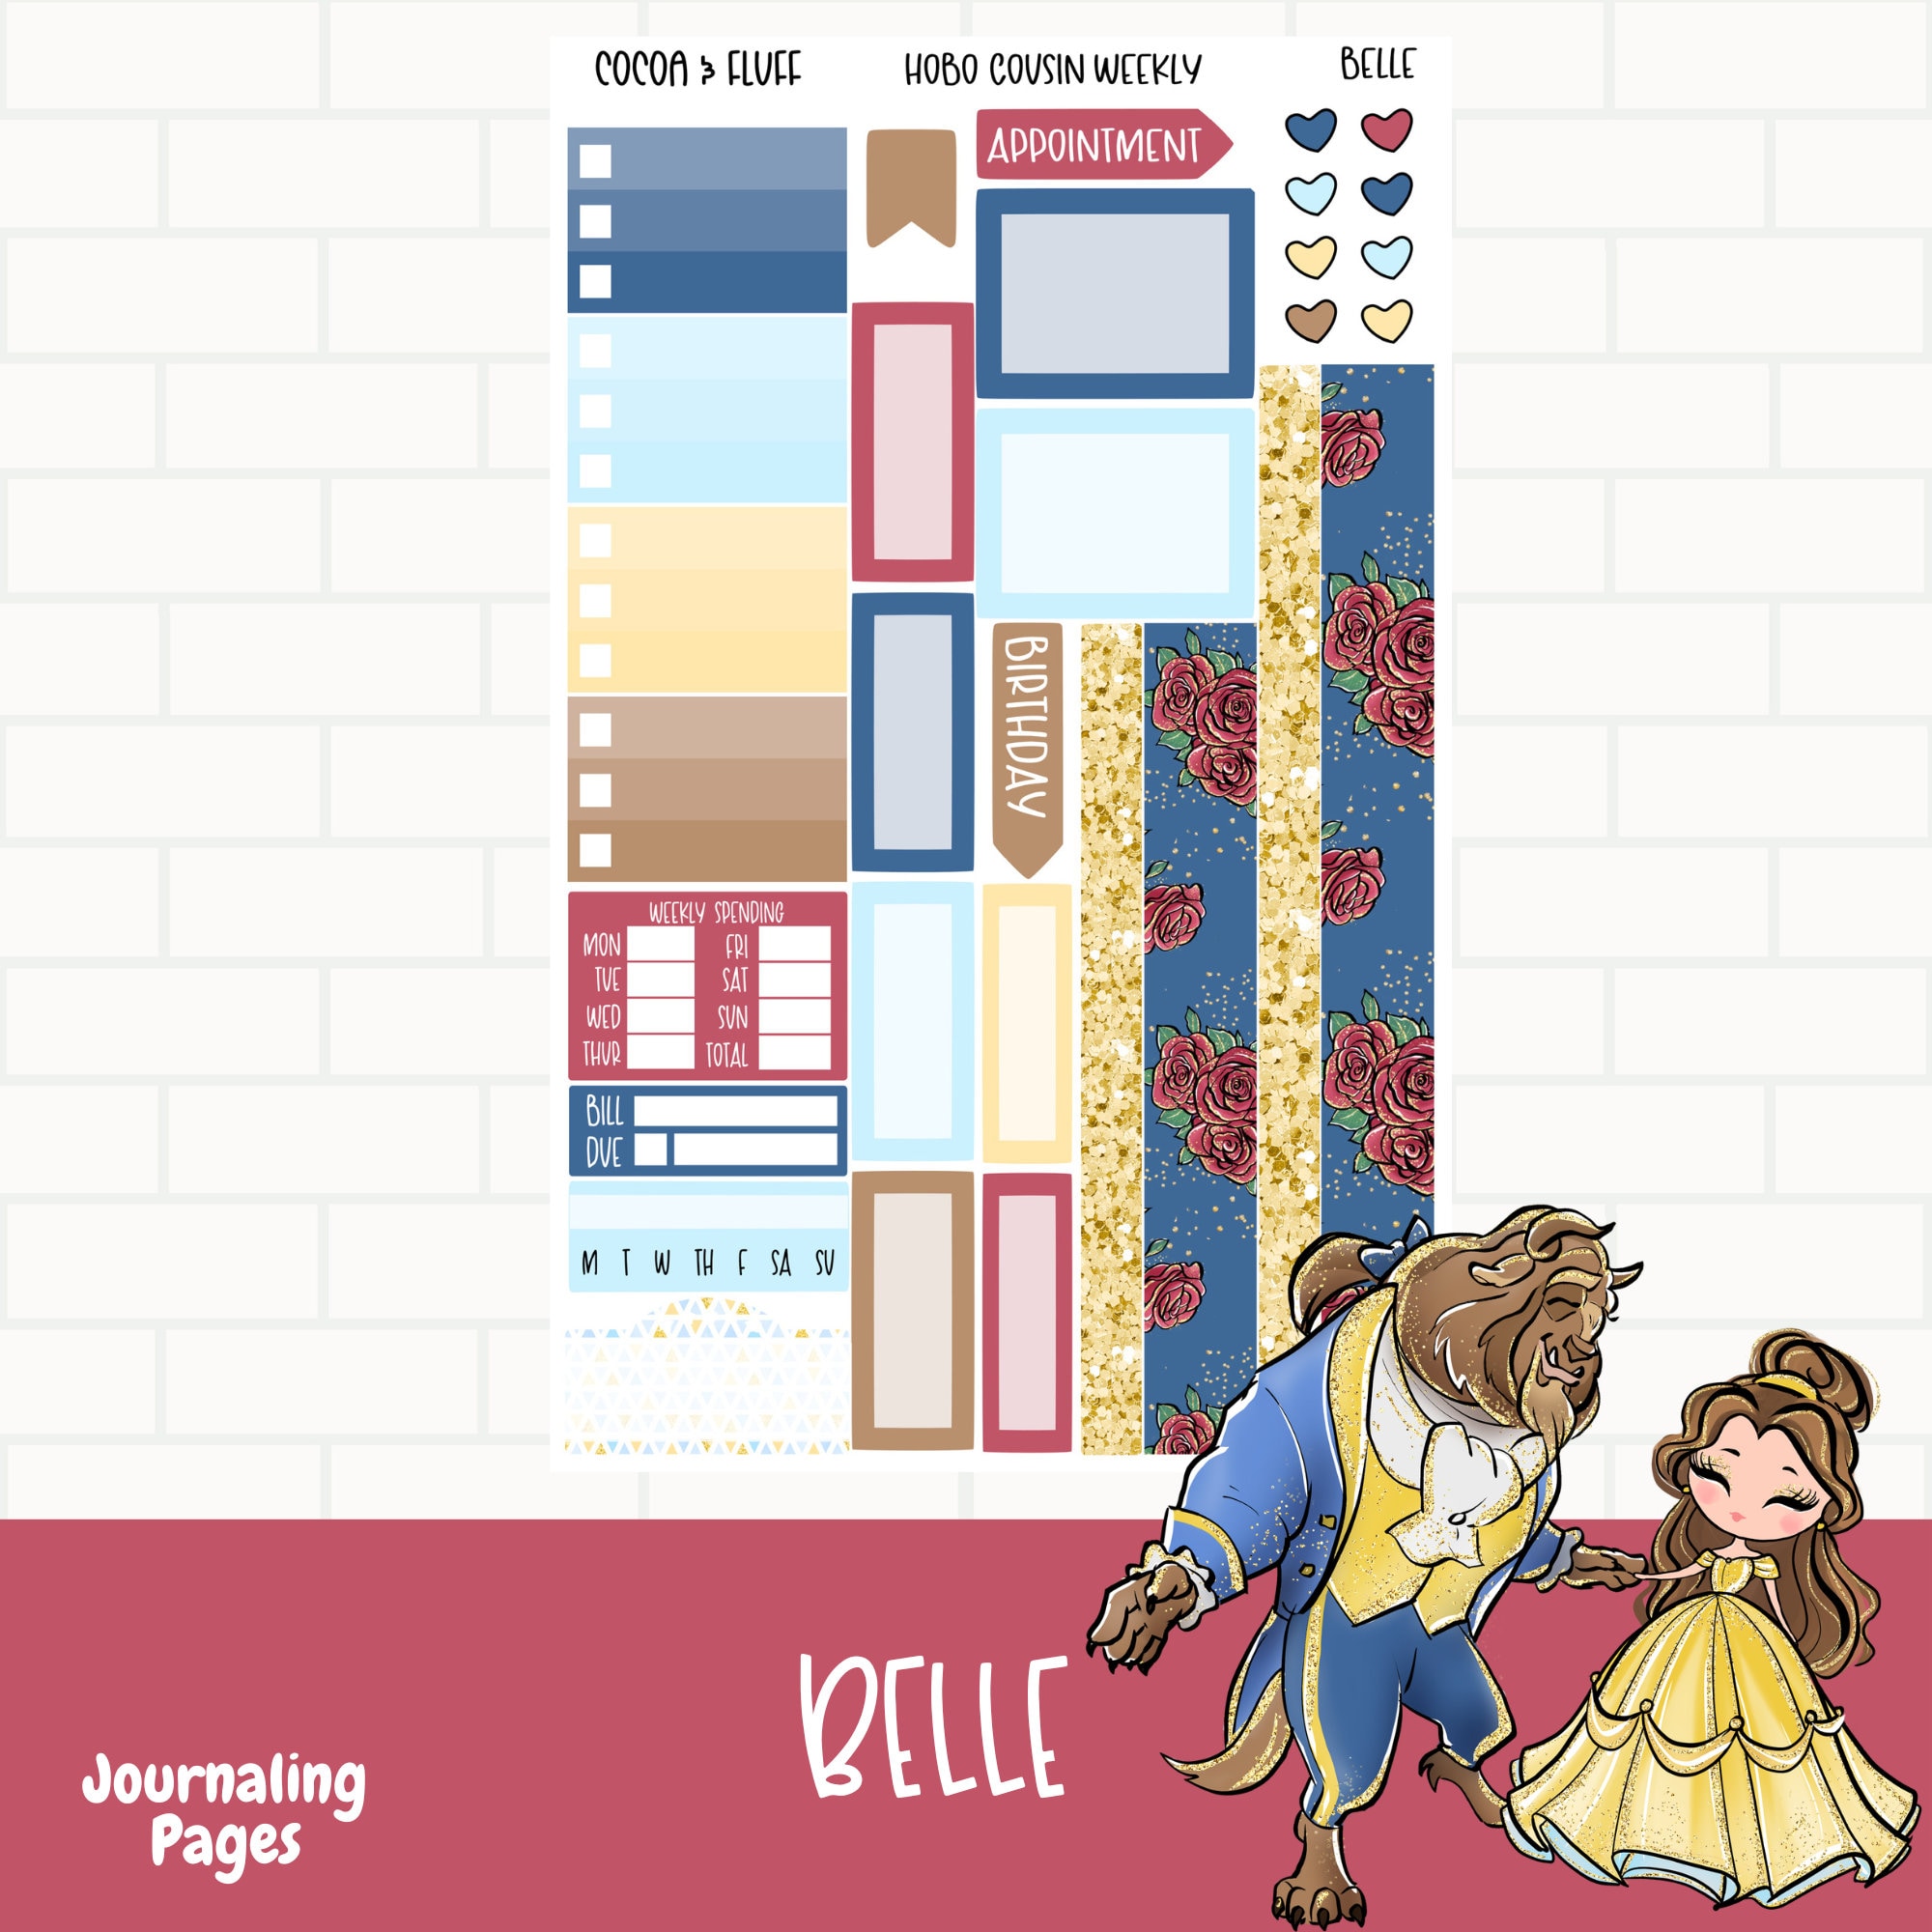 Printable Beauty and the Beast Planner Stickers